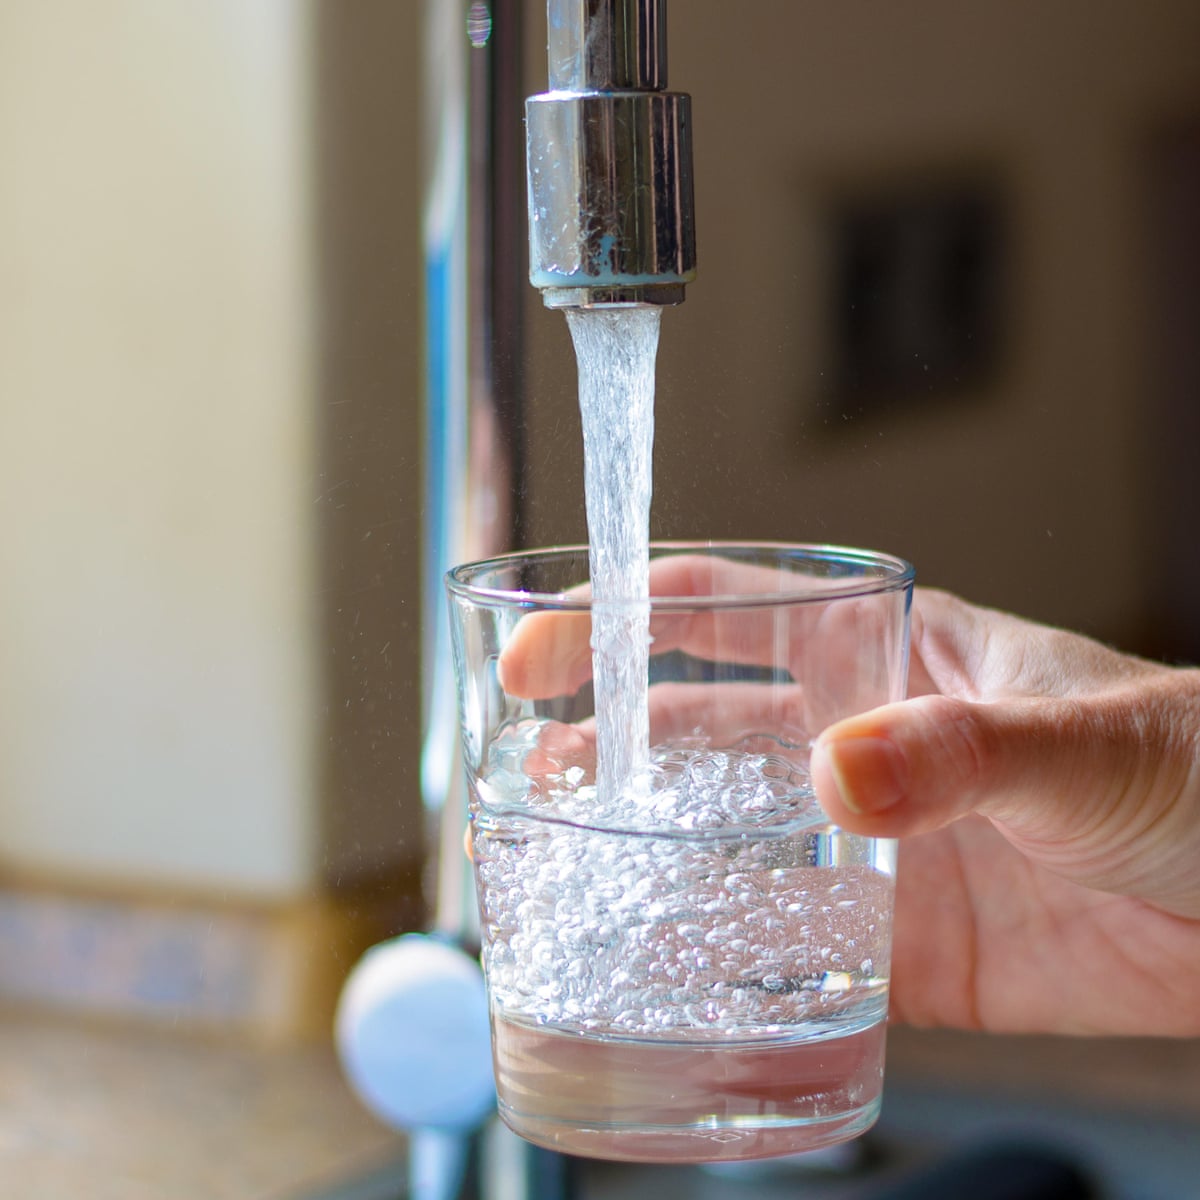 Plastic fibres found in tap water around the world, study reveals |  Plastics | The Guardian